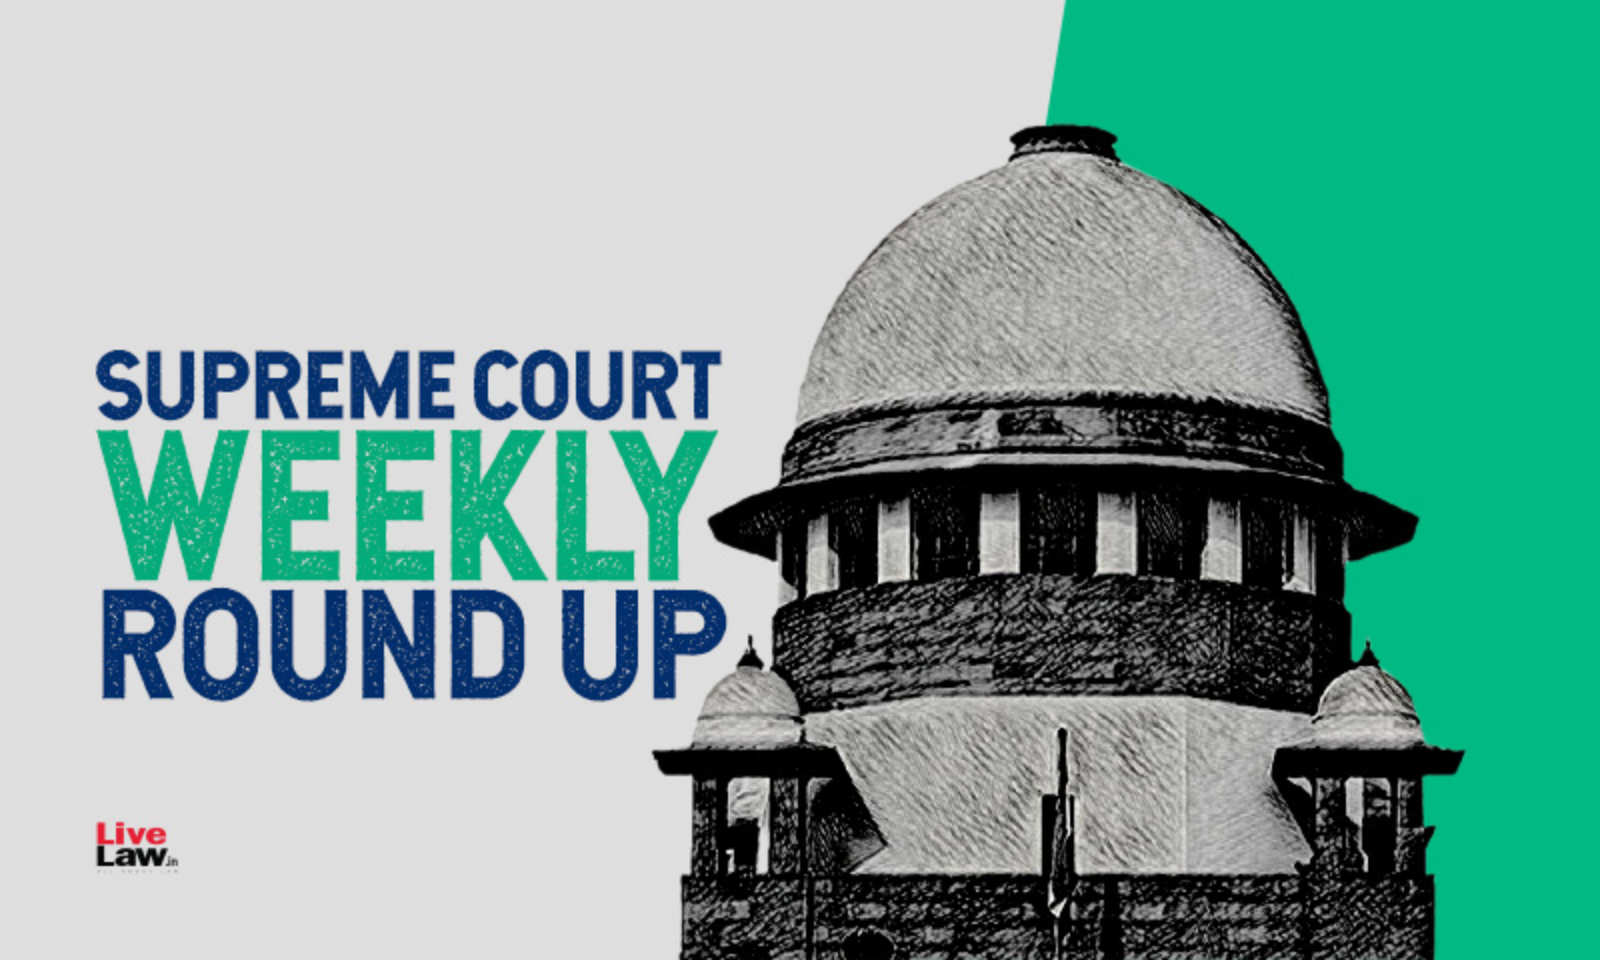 Anamika Mohan Video - Supreme Court Weekly Round Up- December 13 To December 19, 2021